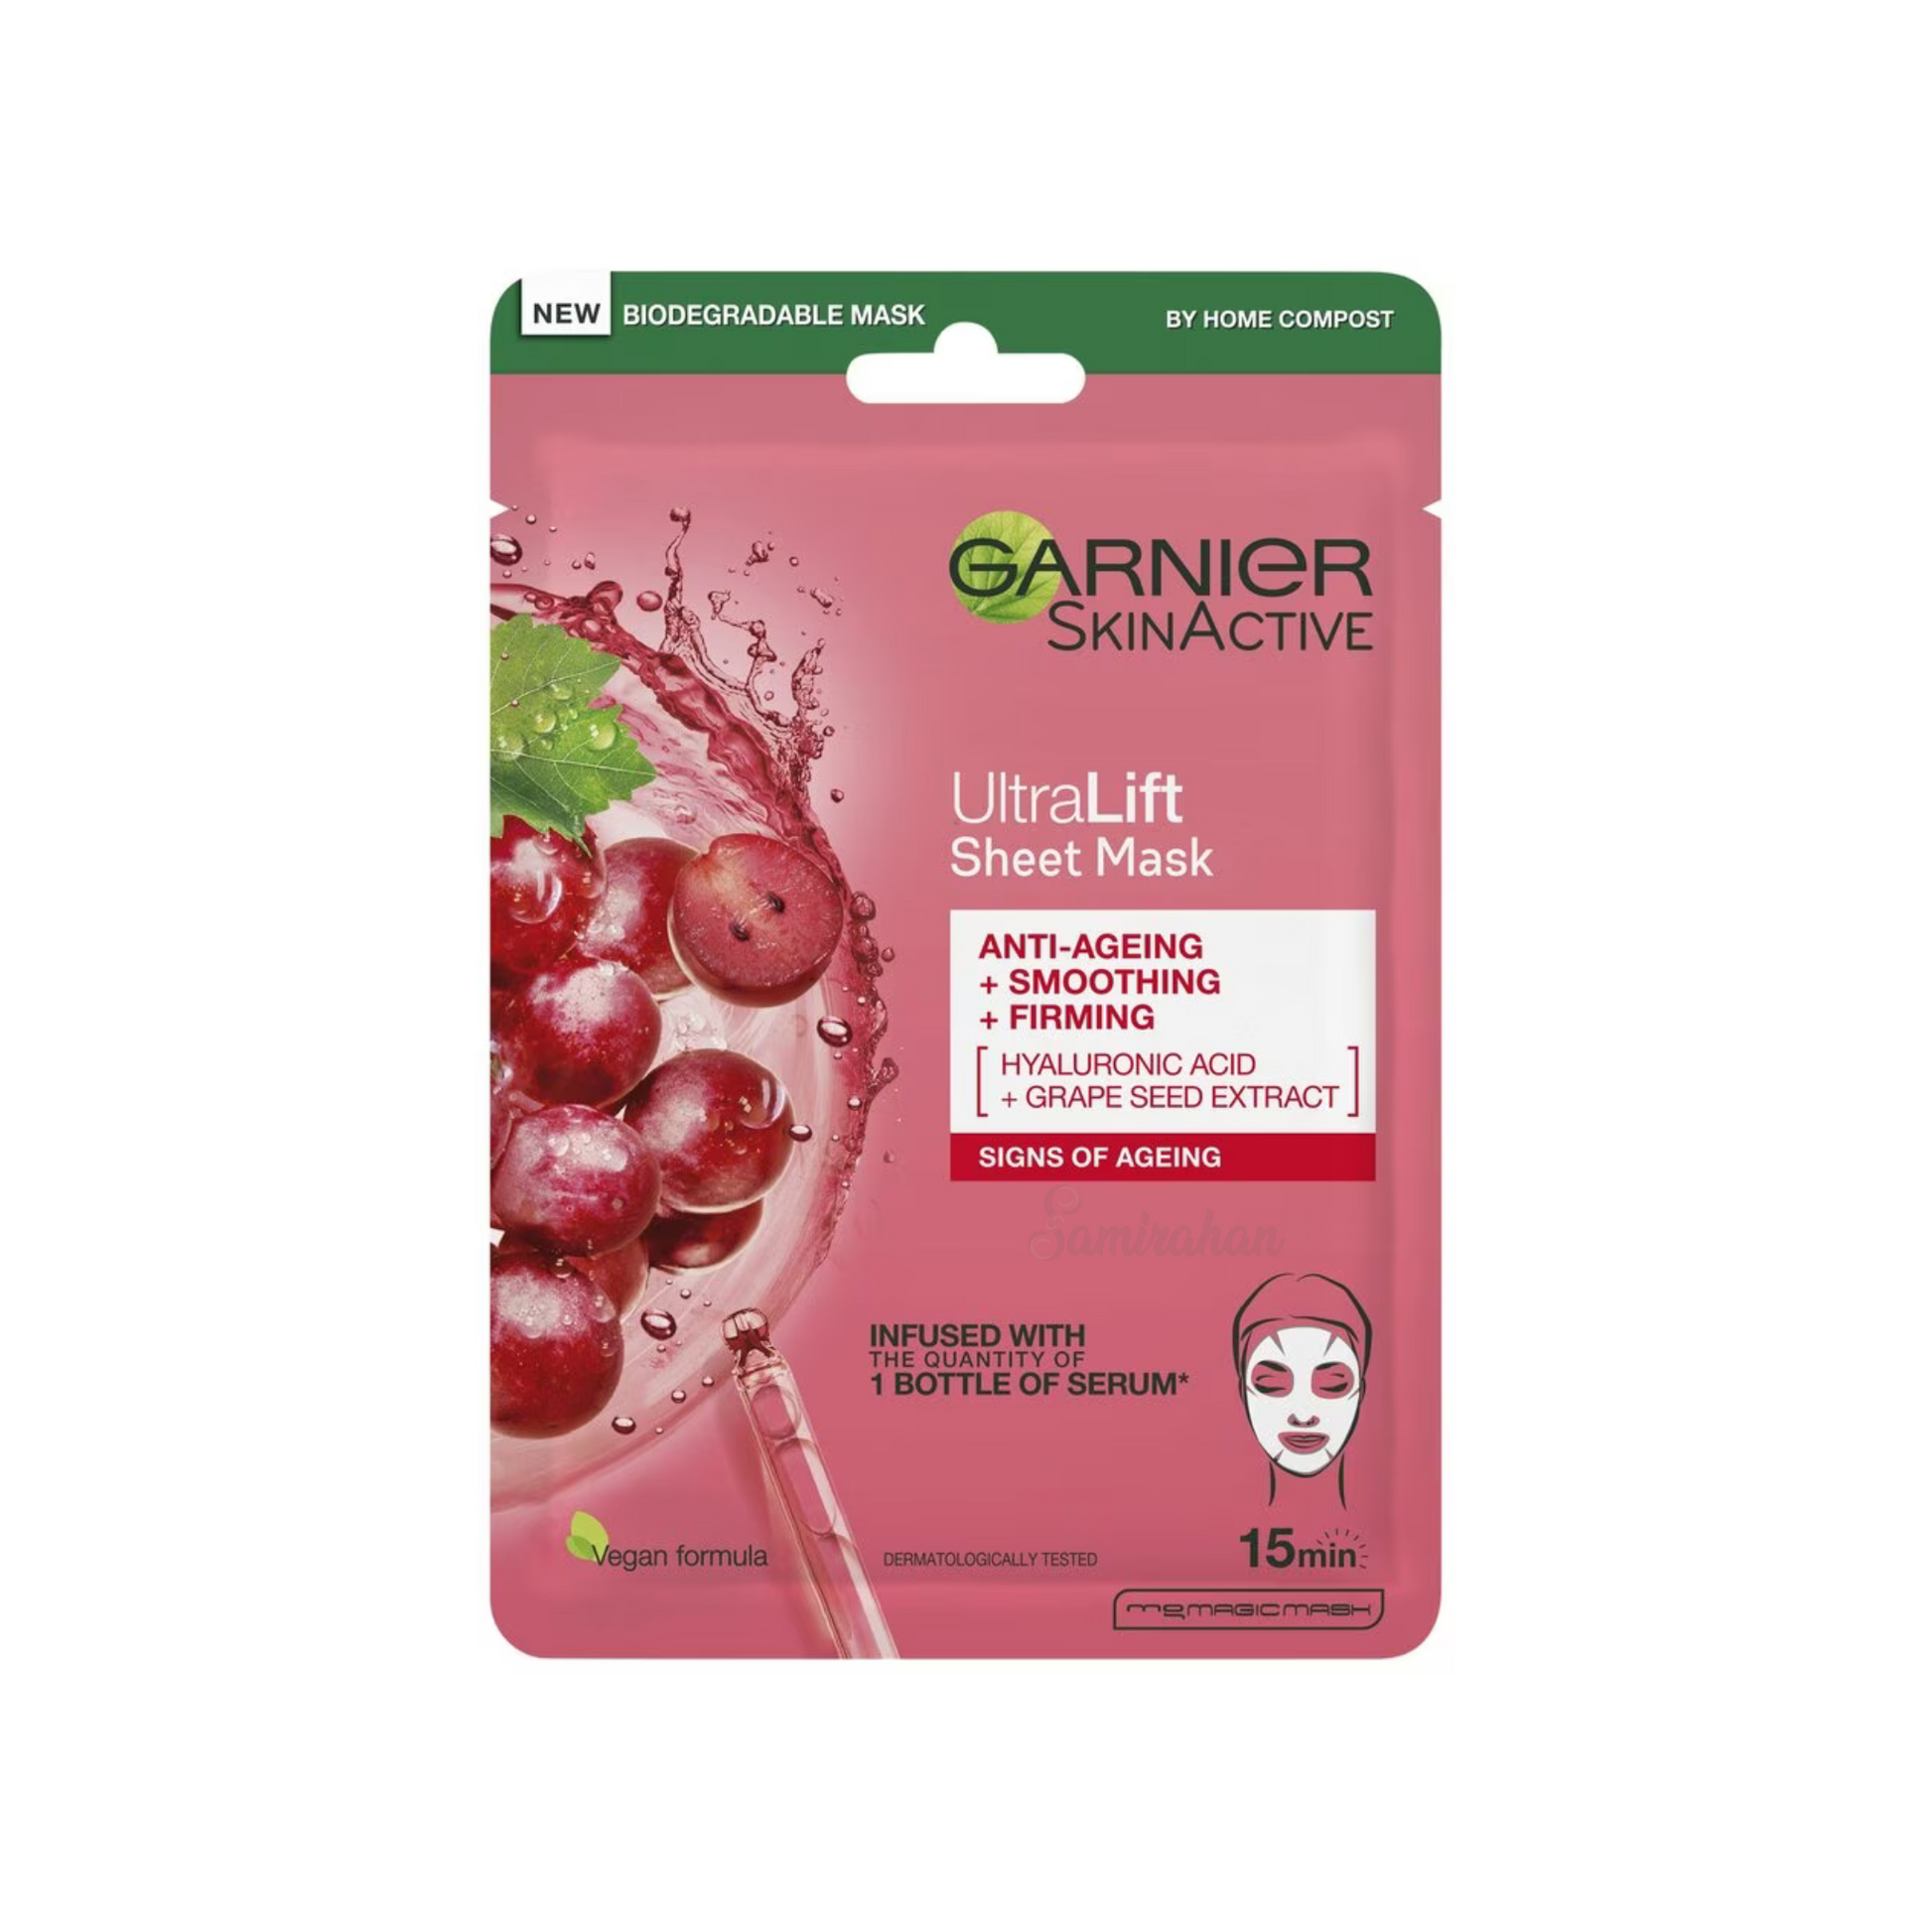 Garnier SkinActive UltraLift Anti-Ageing Smoothing Firming Face Sheet Mask hydrates & revitalises skin. Contains Grape Seed extract & hyaluronic acid. Best imported foreign UK English British genuine authentic real skin care skincare beauty cosmetics premium cheap price in Dhaka Chittagong Sylhet Bangladesh.